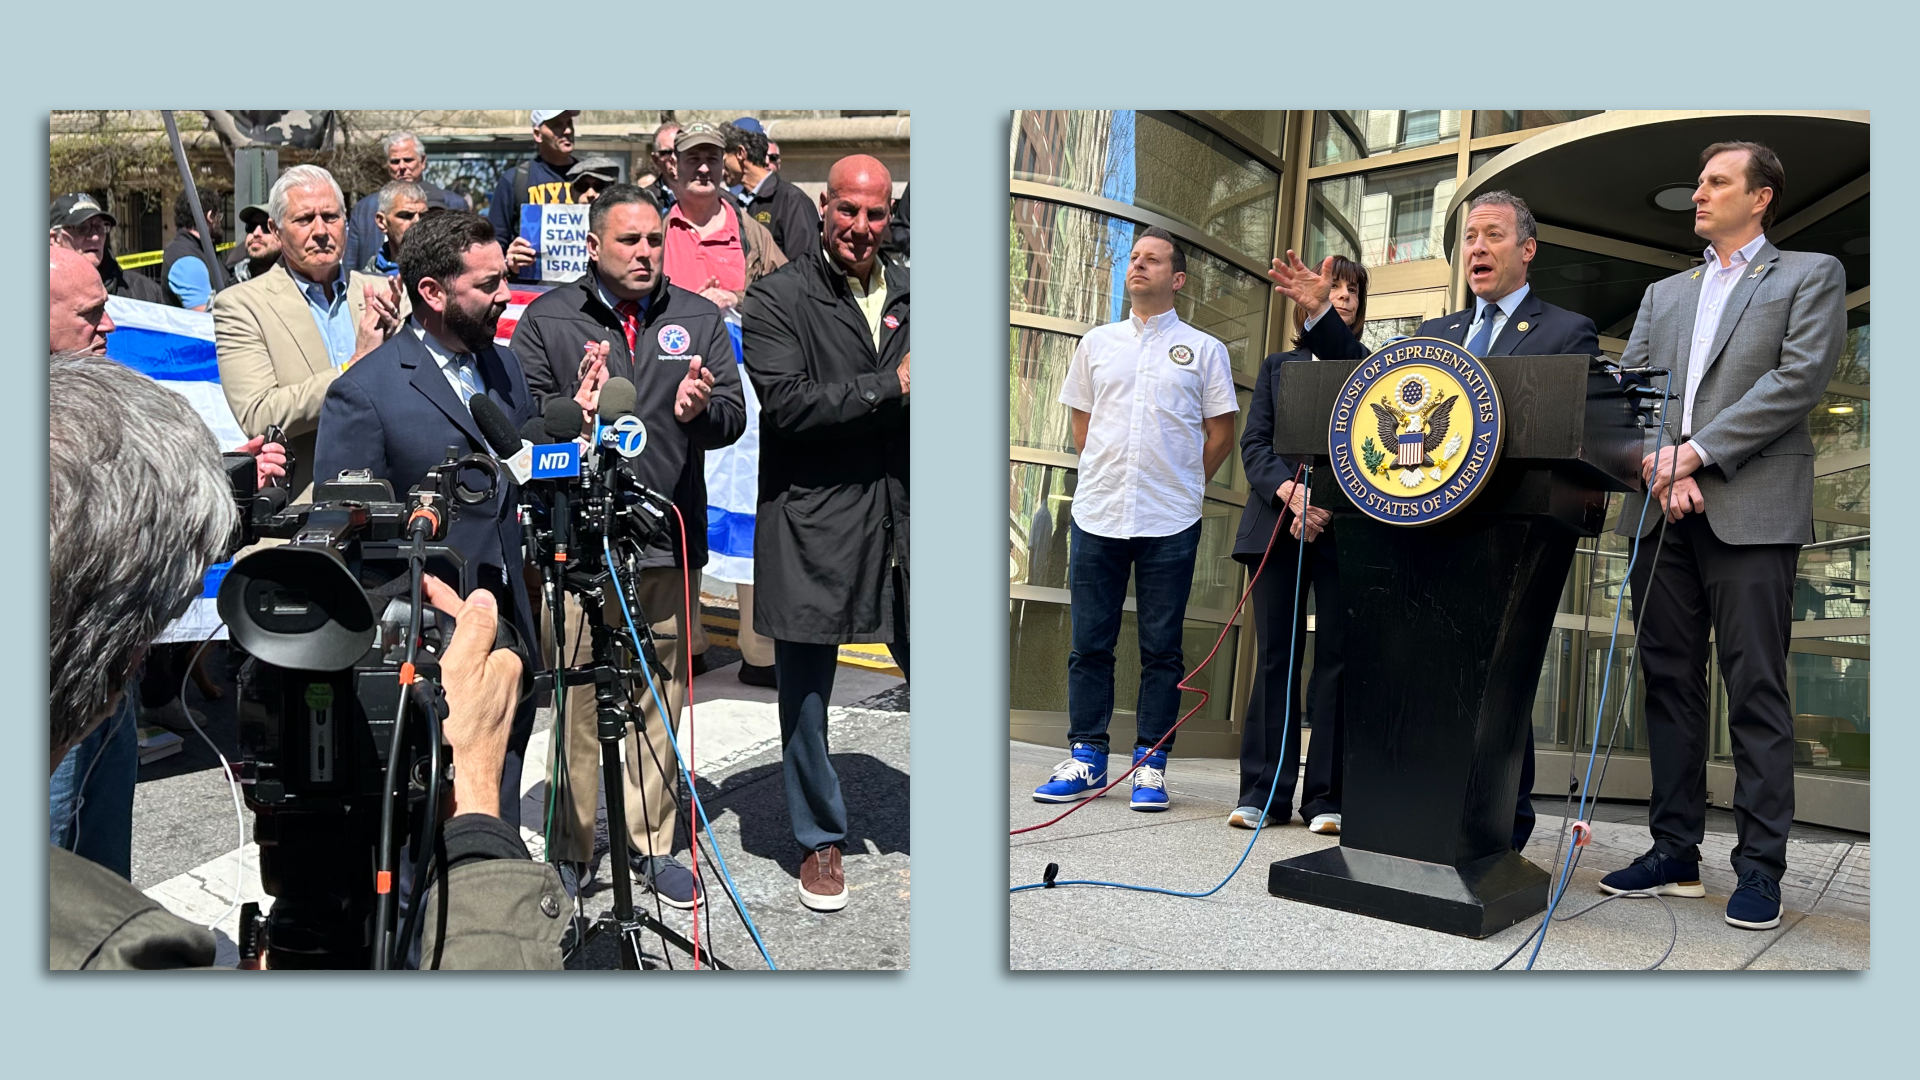 Left: Reps. Mike Lawler and Anthony D'Esposito at a press conference surrounded by people with Israeli flags. Right: Reps. Jared Moskowitz, Kathy Manning, Josh Gottheimer and Dan Goldman at a press conference, standing behind a podium in front of a glass wall.